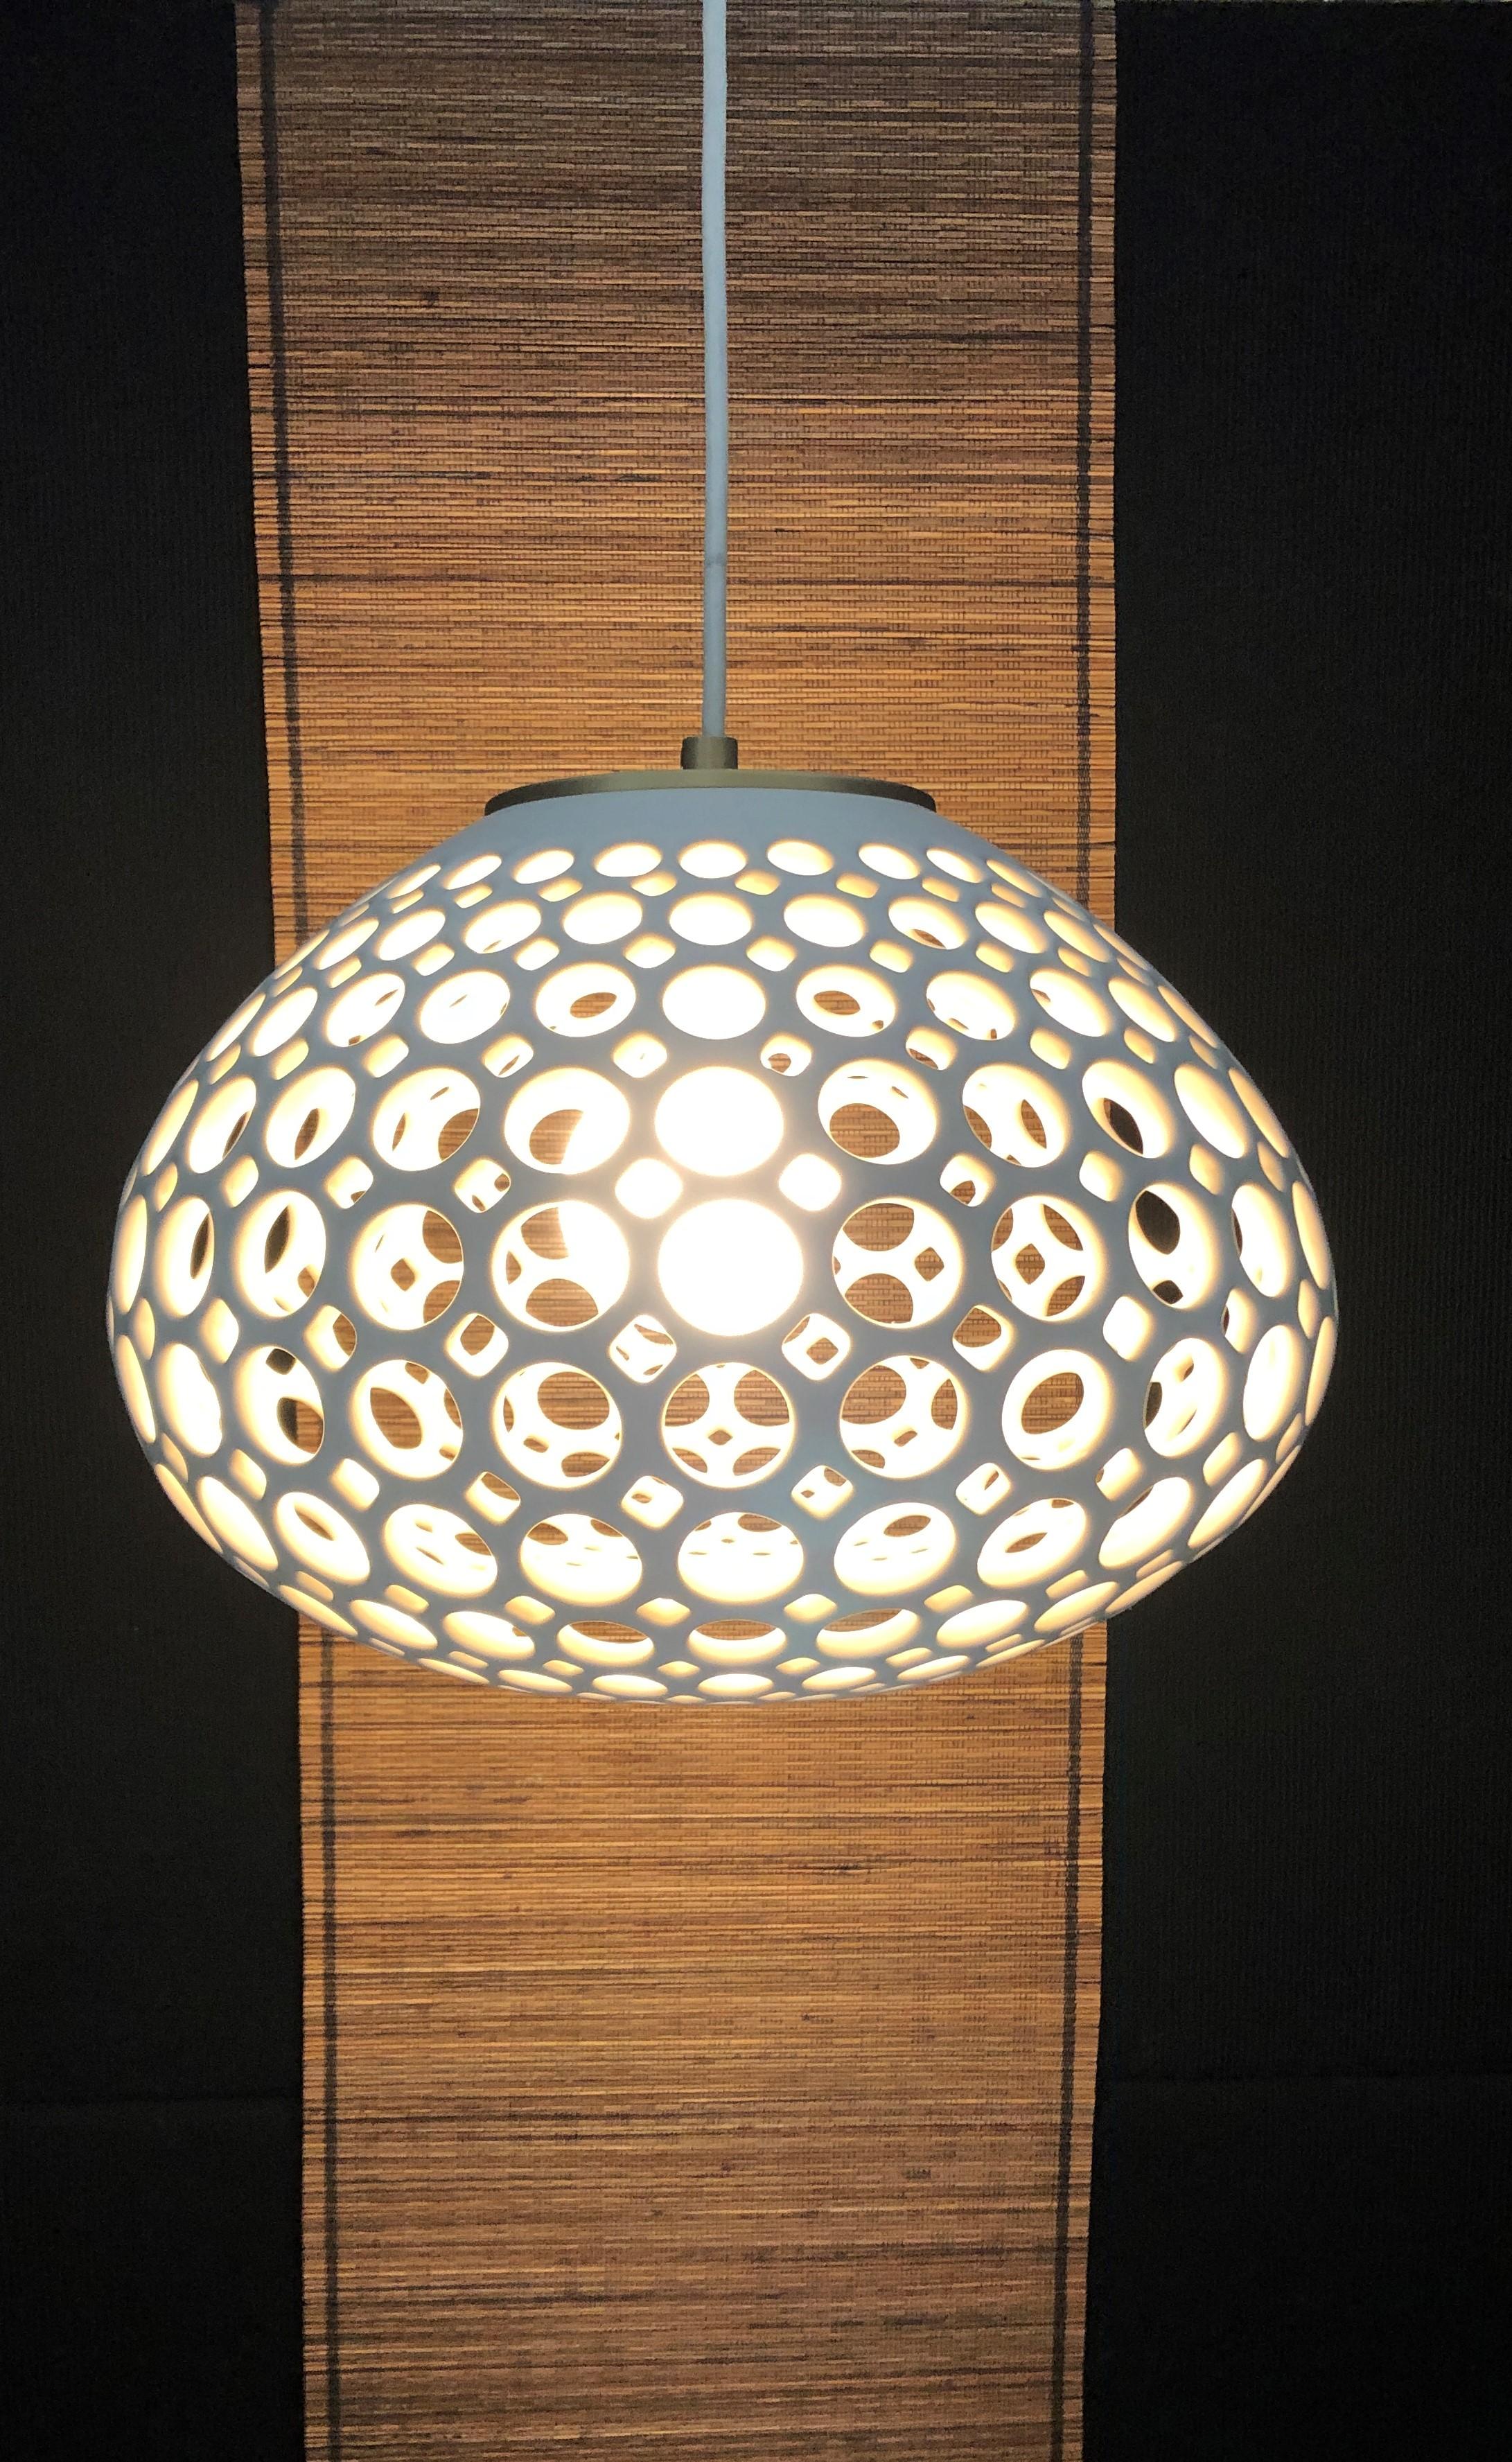 Wheel thrown, hand pierced pendant lamp, glazed with a white satin finish. This pendant has a white round silk cord and a plug for easy use, but can easily be permanently installed in your space. With a low watt bulb It is like a floating sculpture